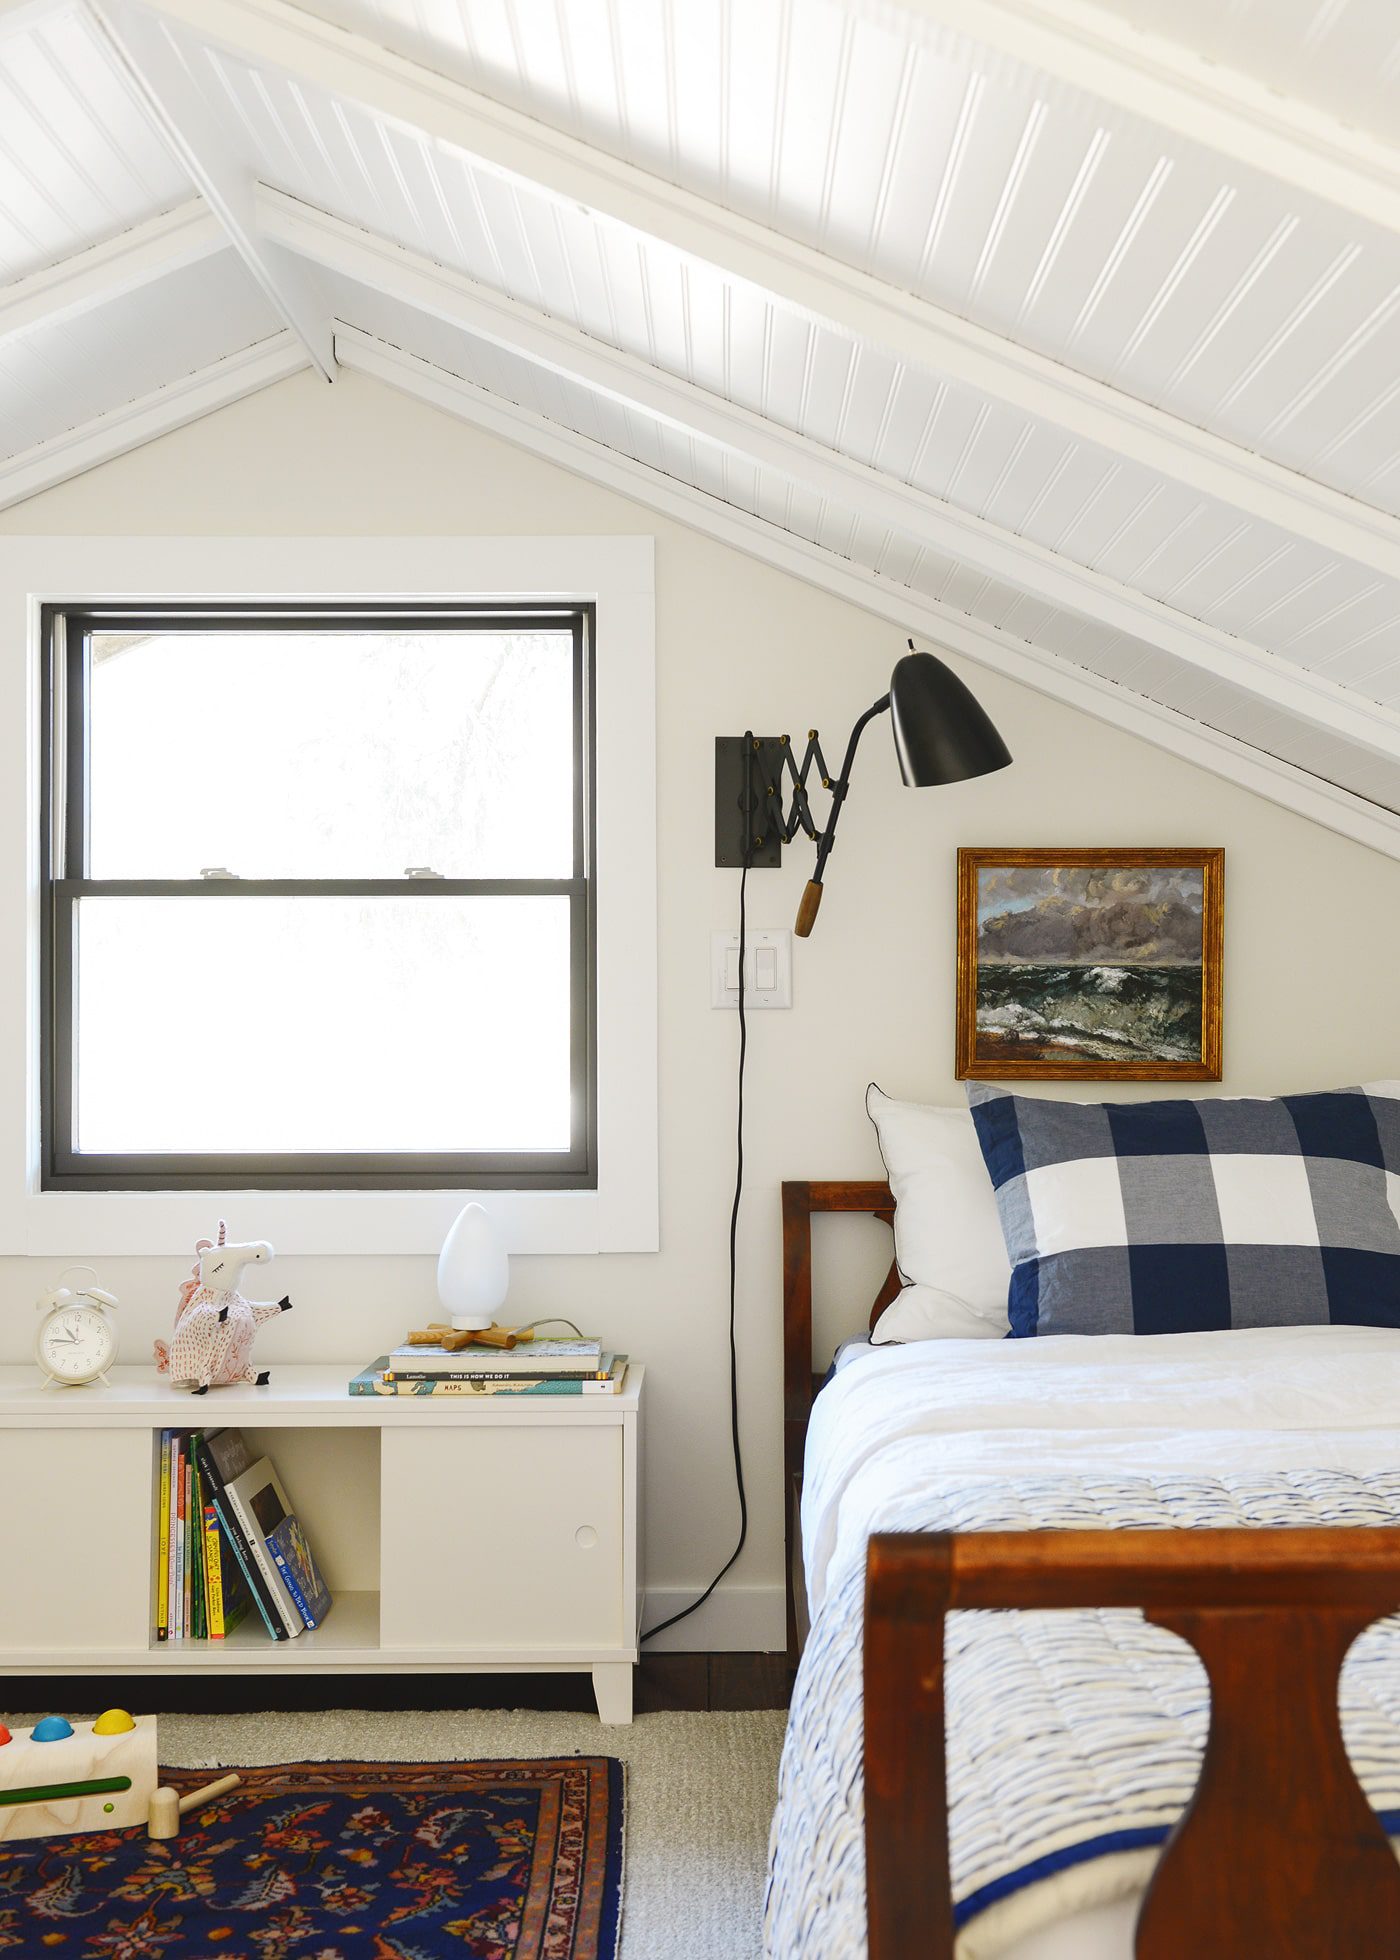 Recessed lighting in a bright and airy kids' sleeping loft | via Yellow Brick Home